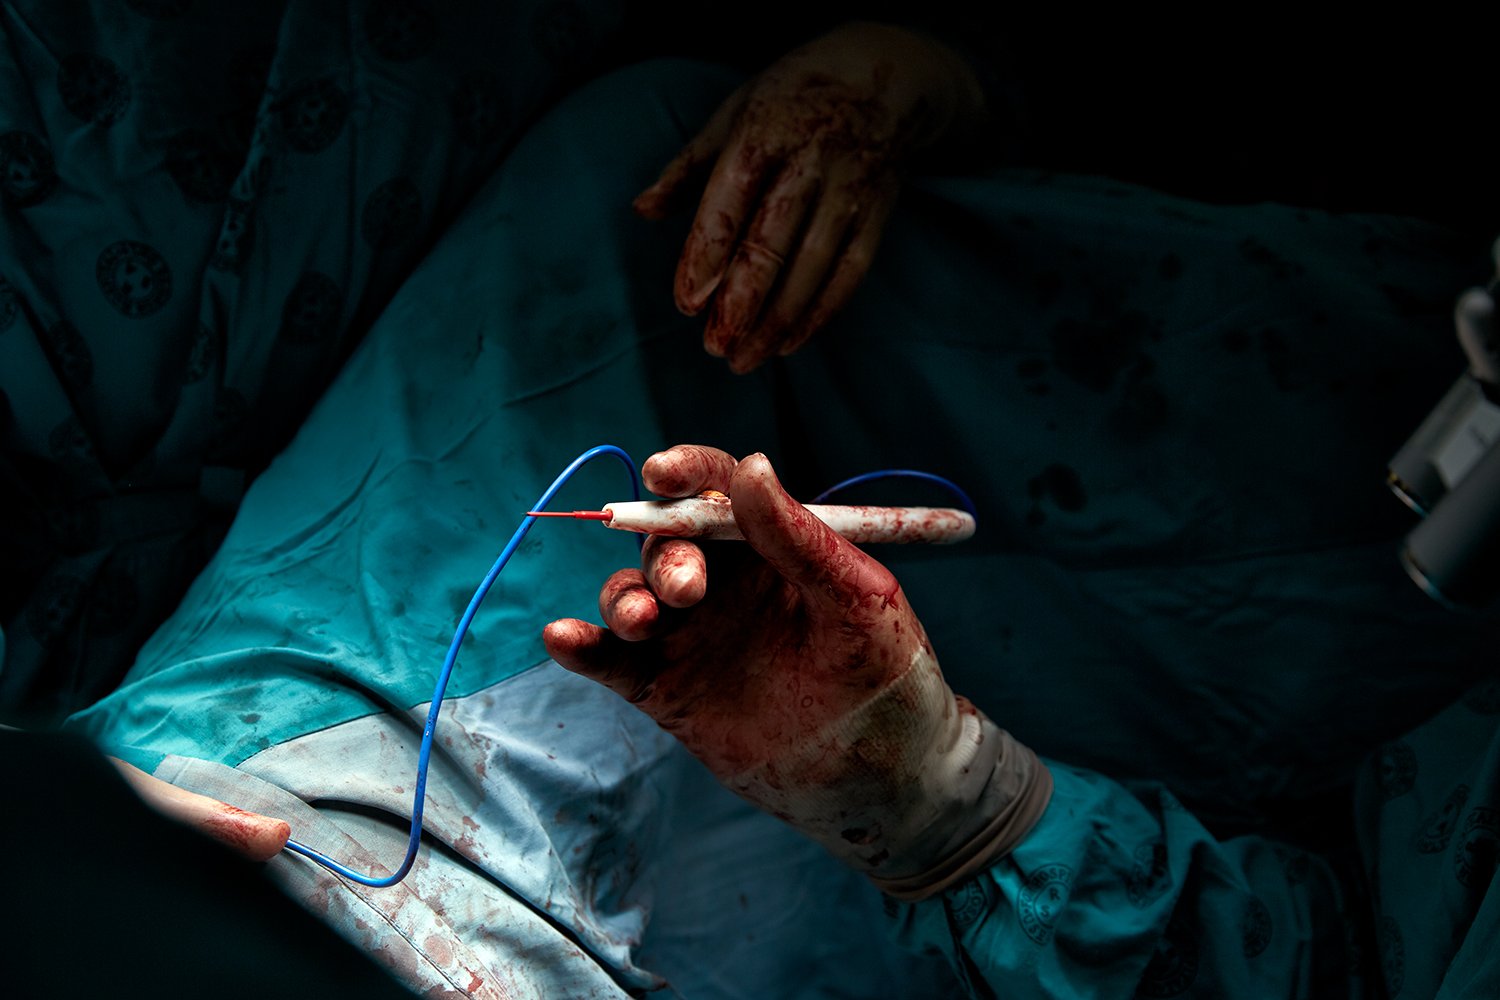  The right hand belonging to Dr. Kevin Adams, during the five-and-half hour gender-affirming surgery of Chedino, Groote Schuur Hospital, Cape Town, 2017.  Two teams of surgeons worked on Chedino during the procedure: one team focused on the "top" sur